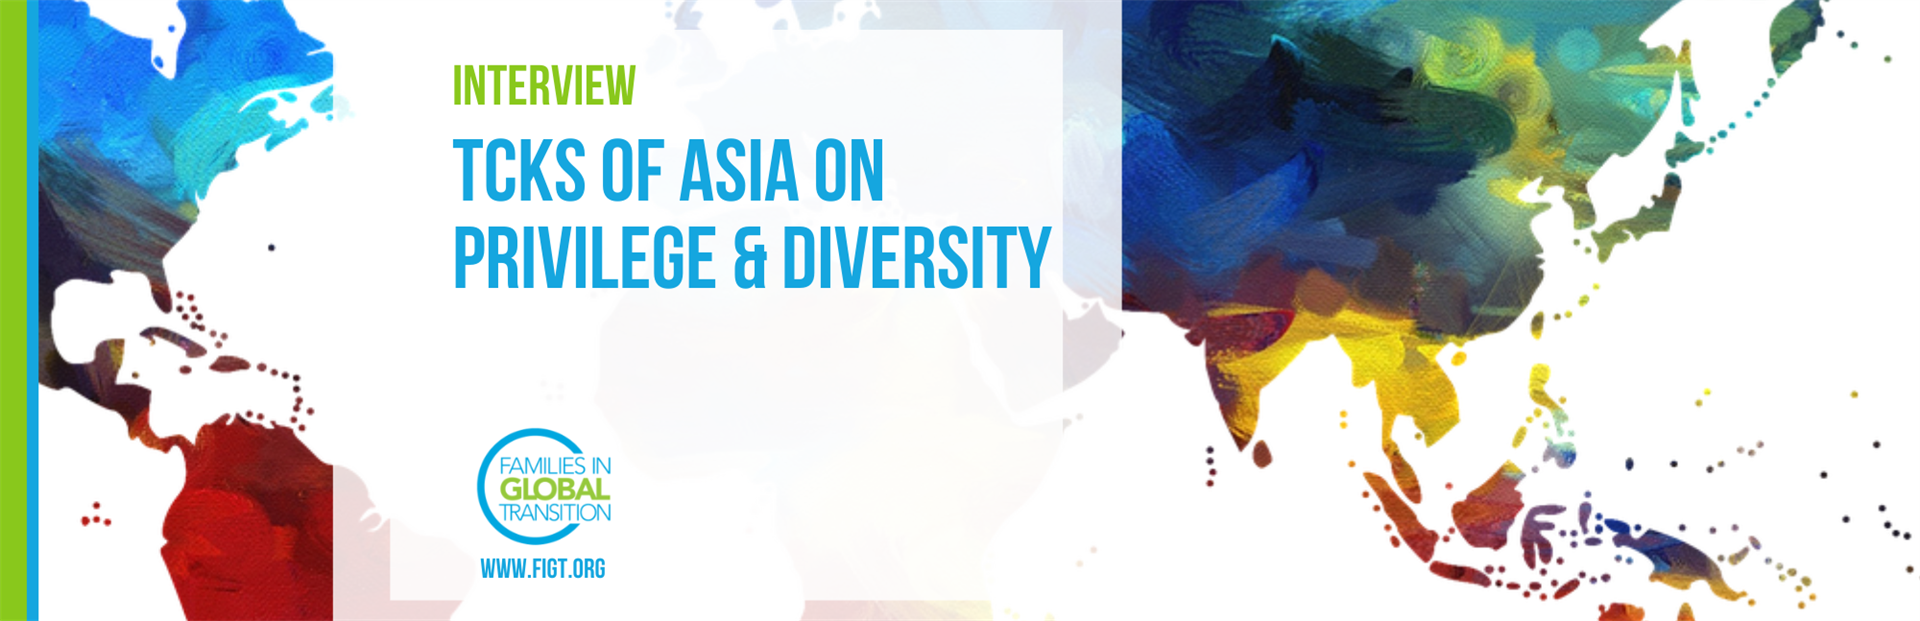 Title: TCKs of Asia on privilege and diversity